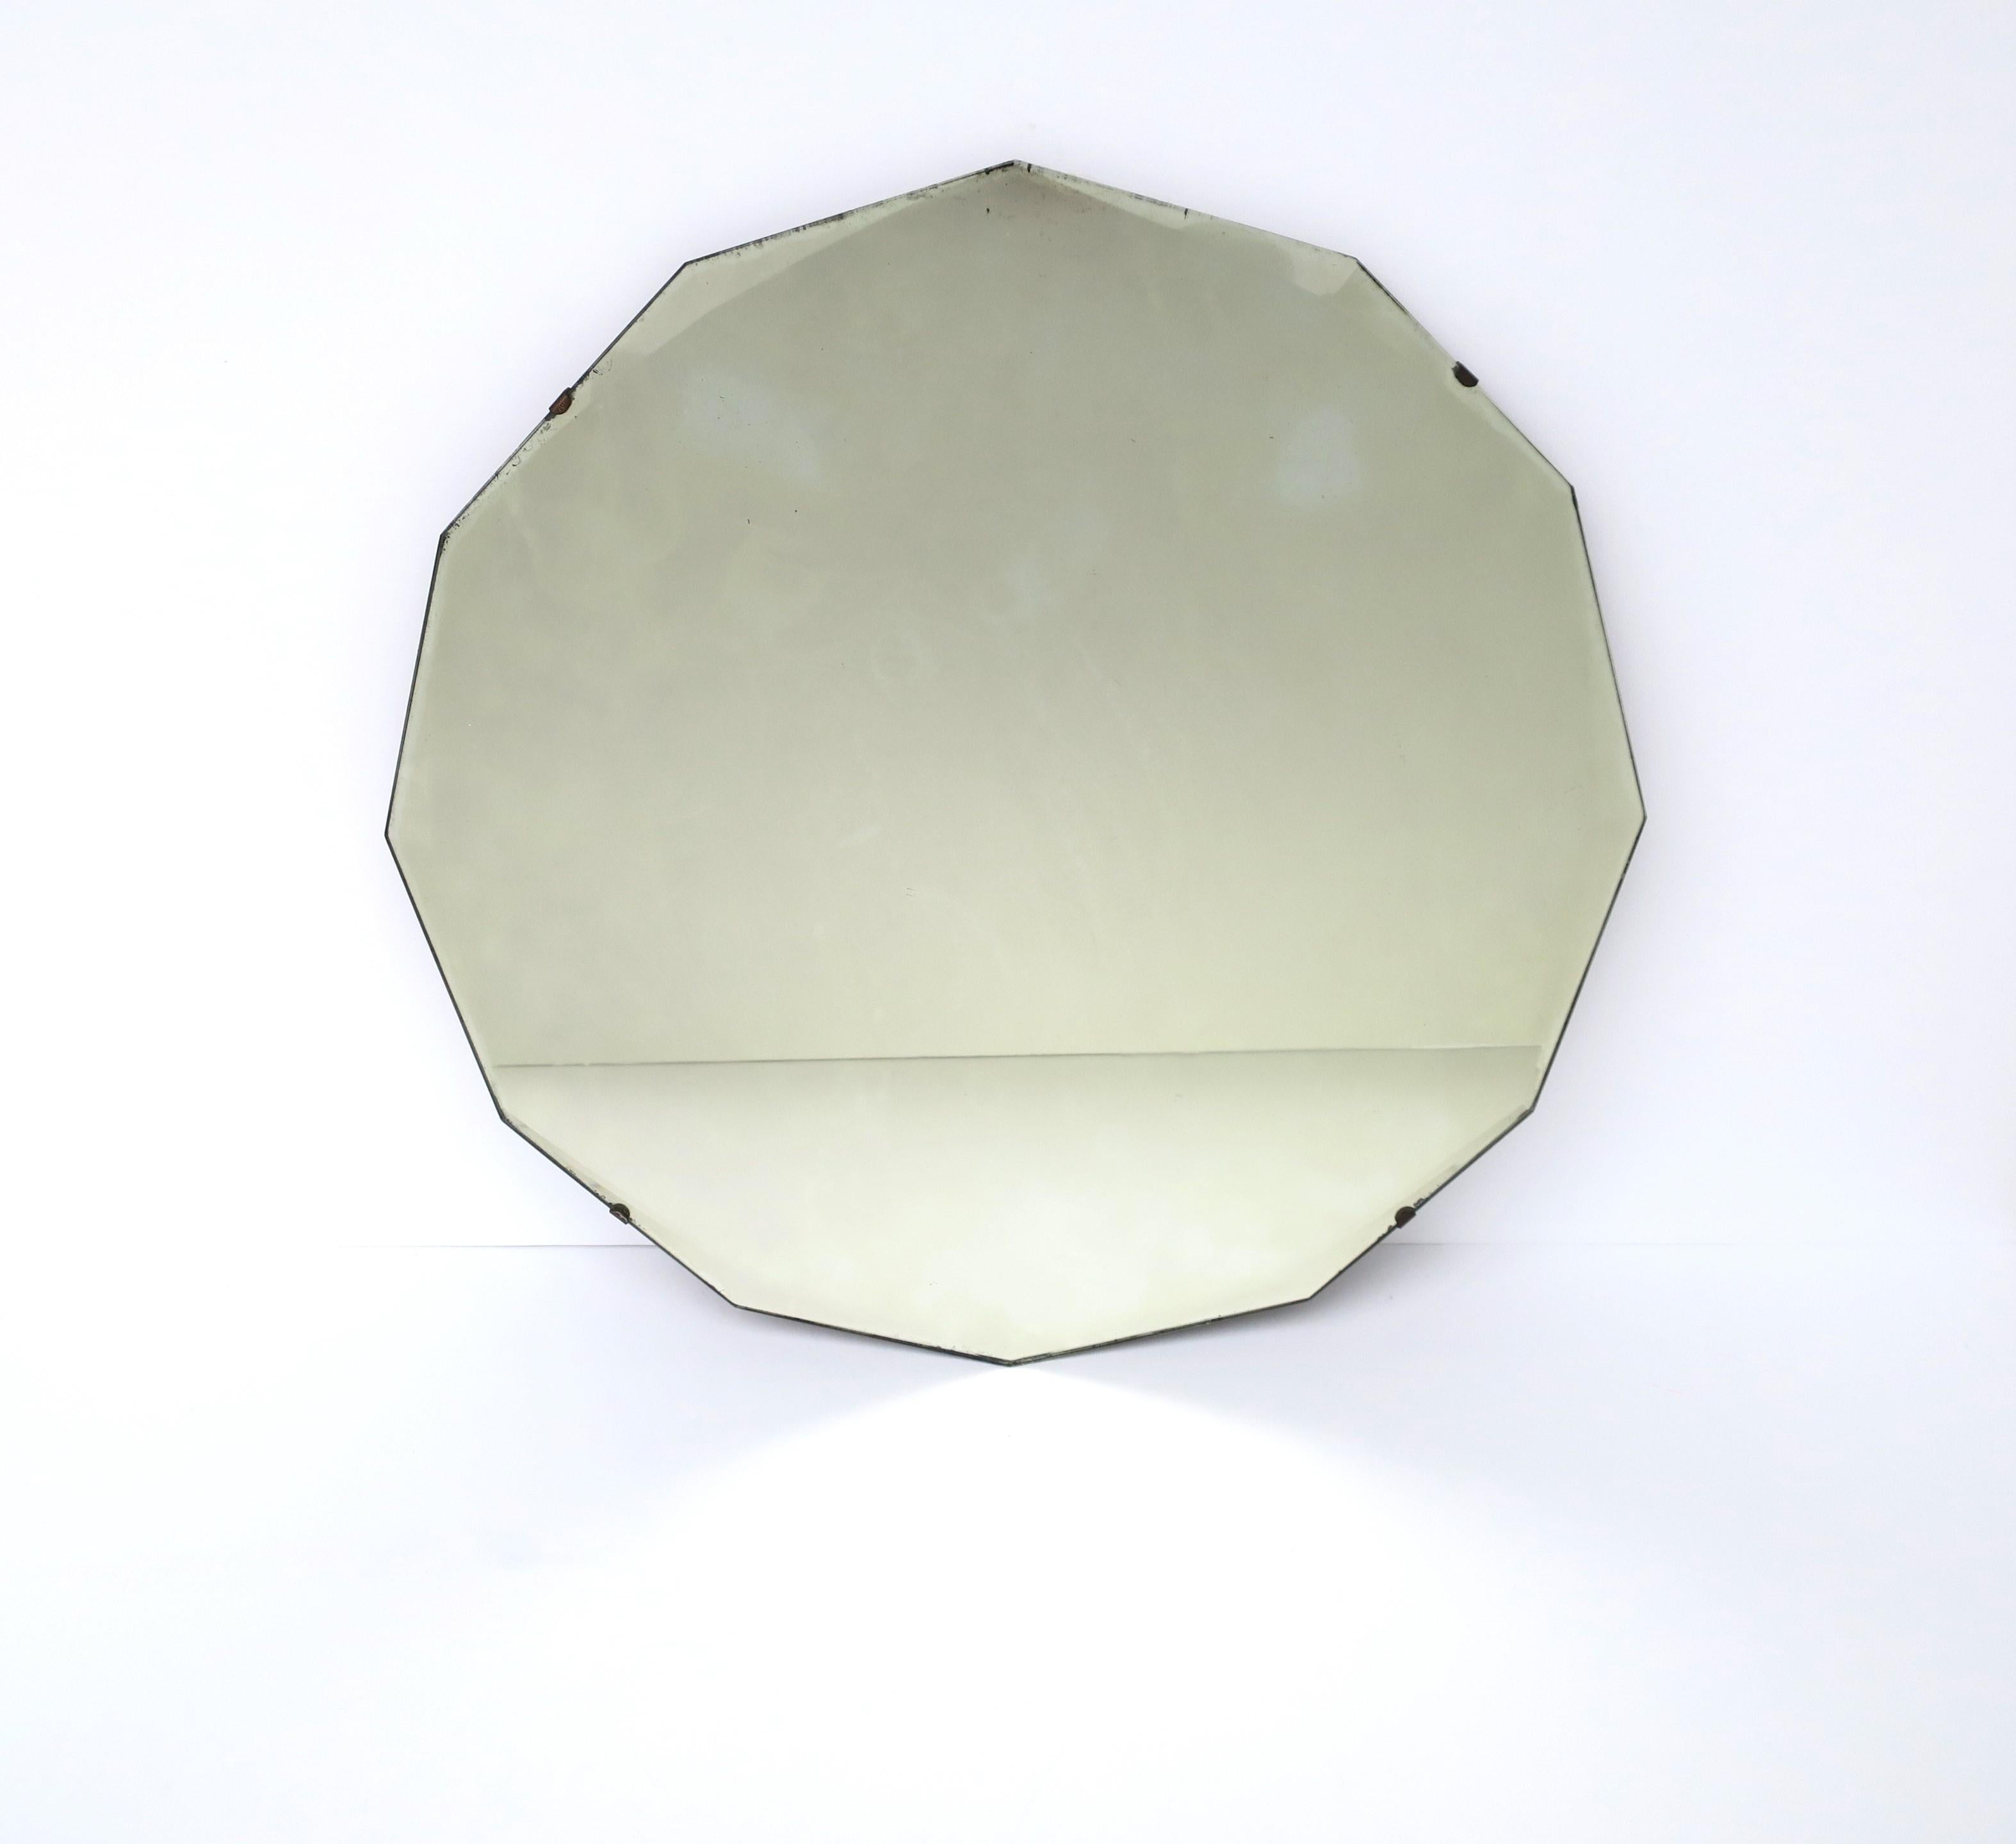 A round 12 sided (dodecagon) beveled edge wall glass mirror, in the Hollywood Regency style, circa early-20th century, 1940s. Beautiful intersecting bevel at each point (12) around mirror's edge. Piece may work well for a foyer, vanity, dressing